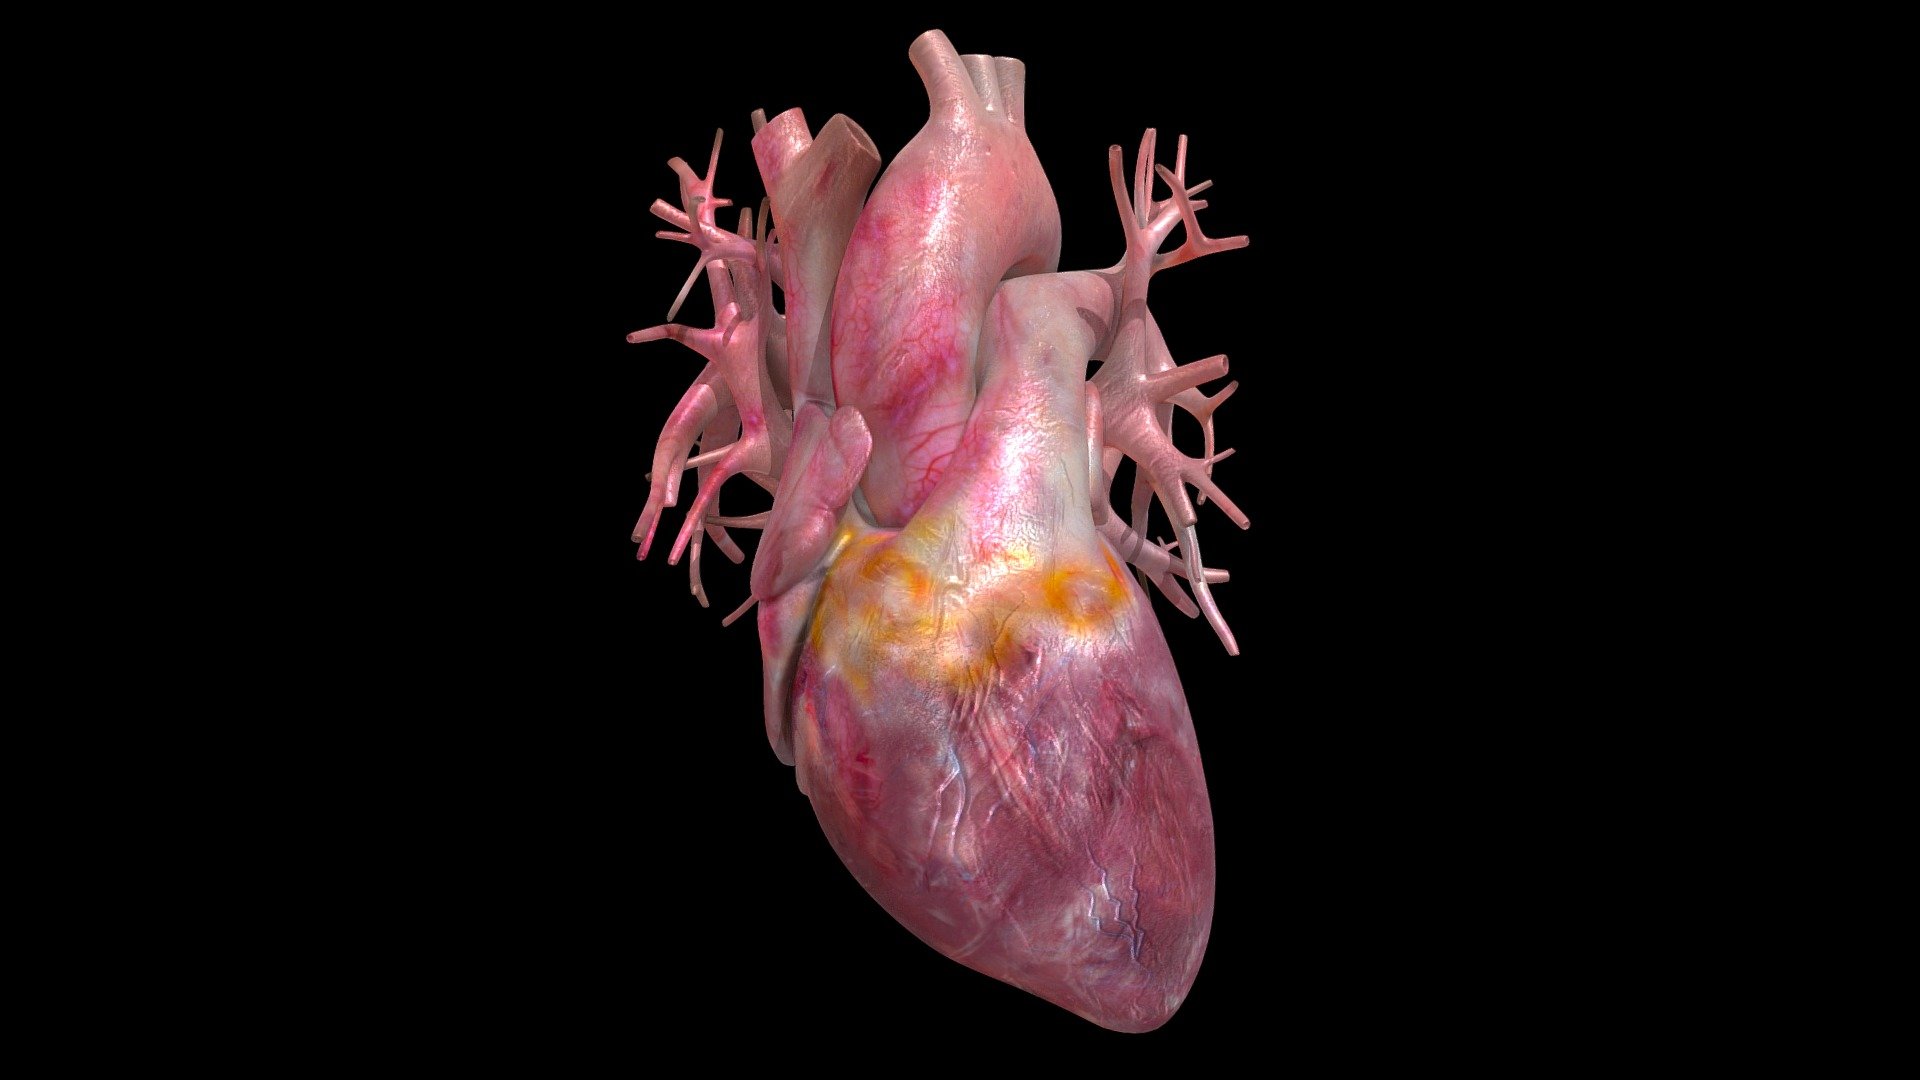 Realistic Rhythm Heart Animation
The heart is a muscular organ about the size of a fist, located just behind and slightly left of the breastbone. The heart pumps blood through the network of arteries and veins called the cardiovascular system 3d model